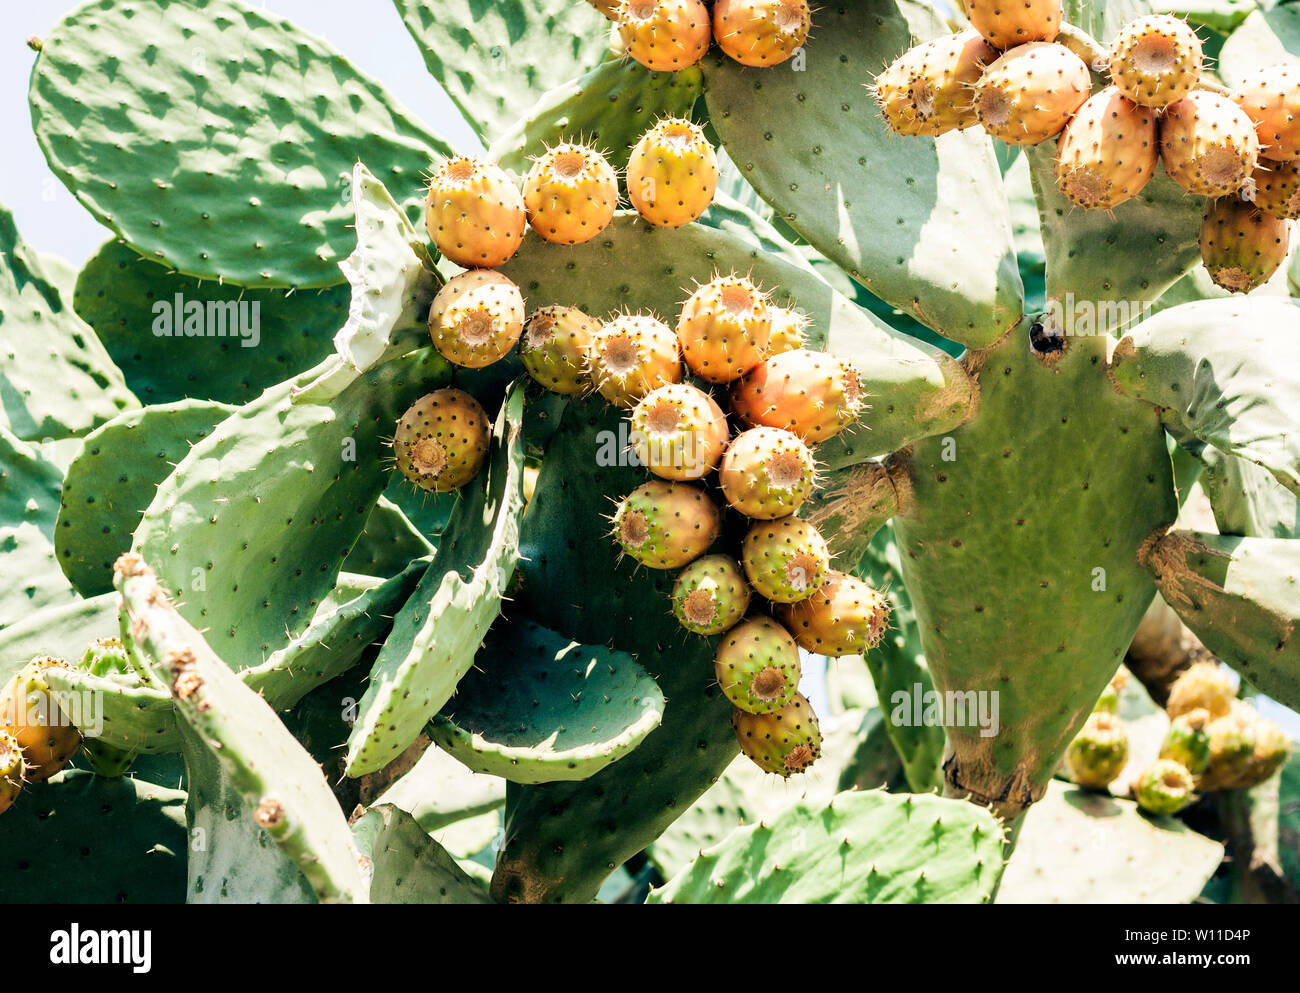 Fruits of Prickly pear cactus with fruits also known as Opuntia, ficus-indica, Indian fig opuntia in the street of Taormina, Sicily, Italy Stock Photo